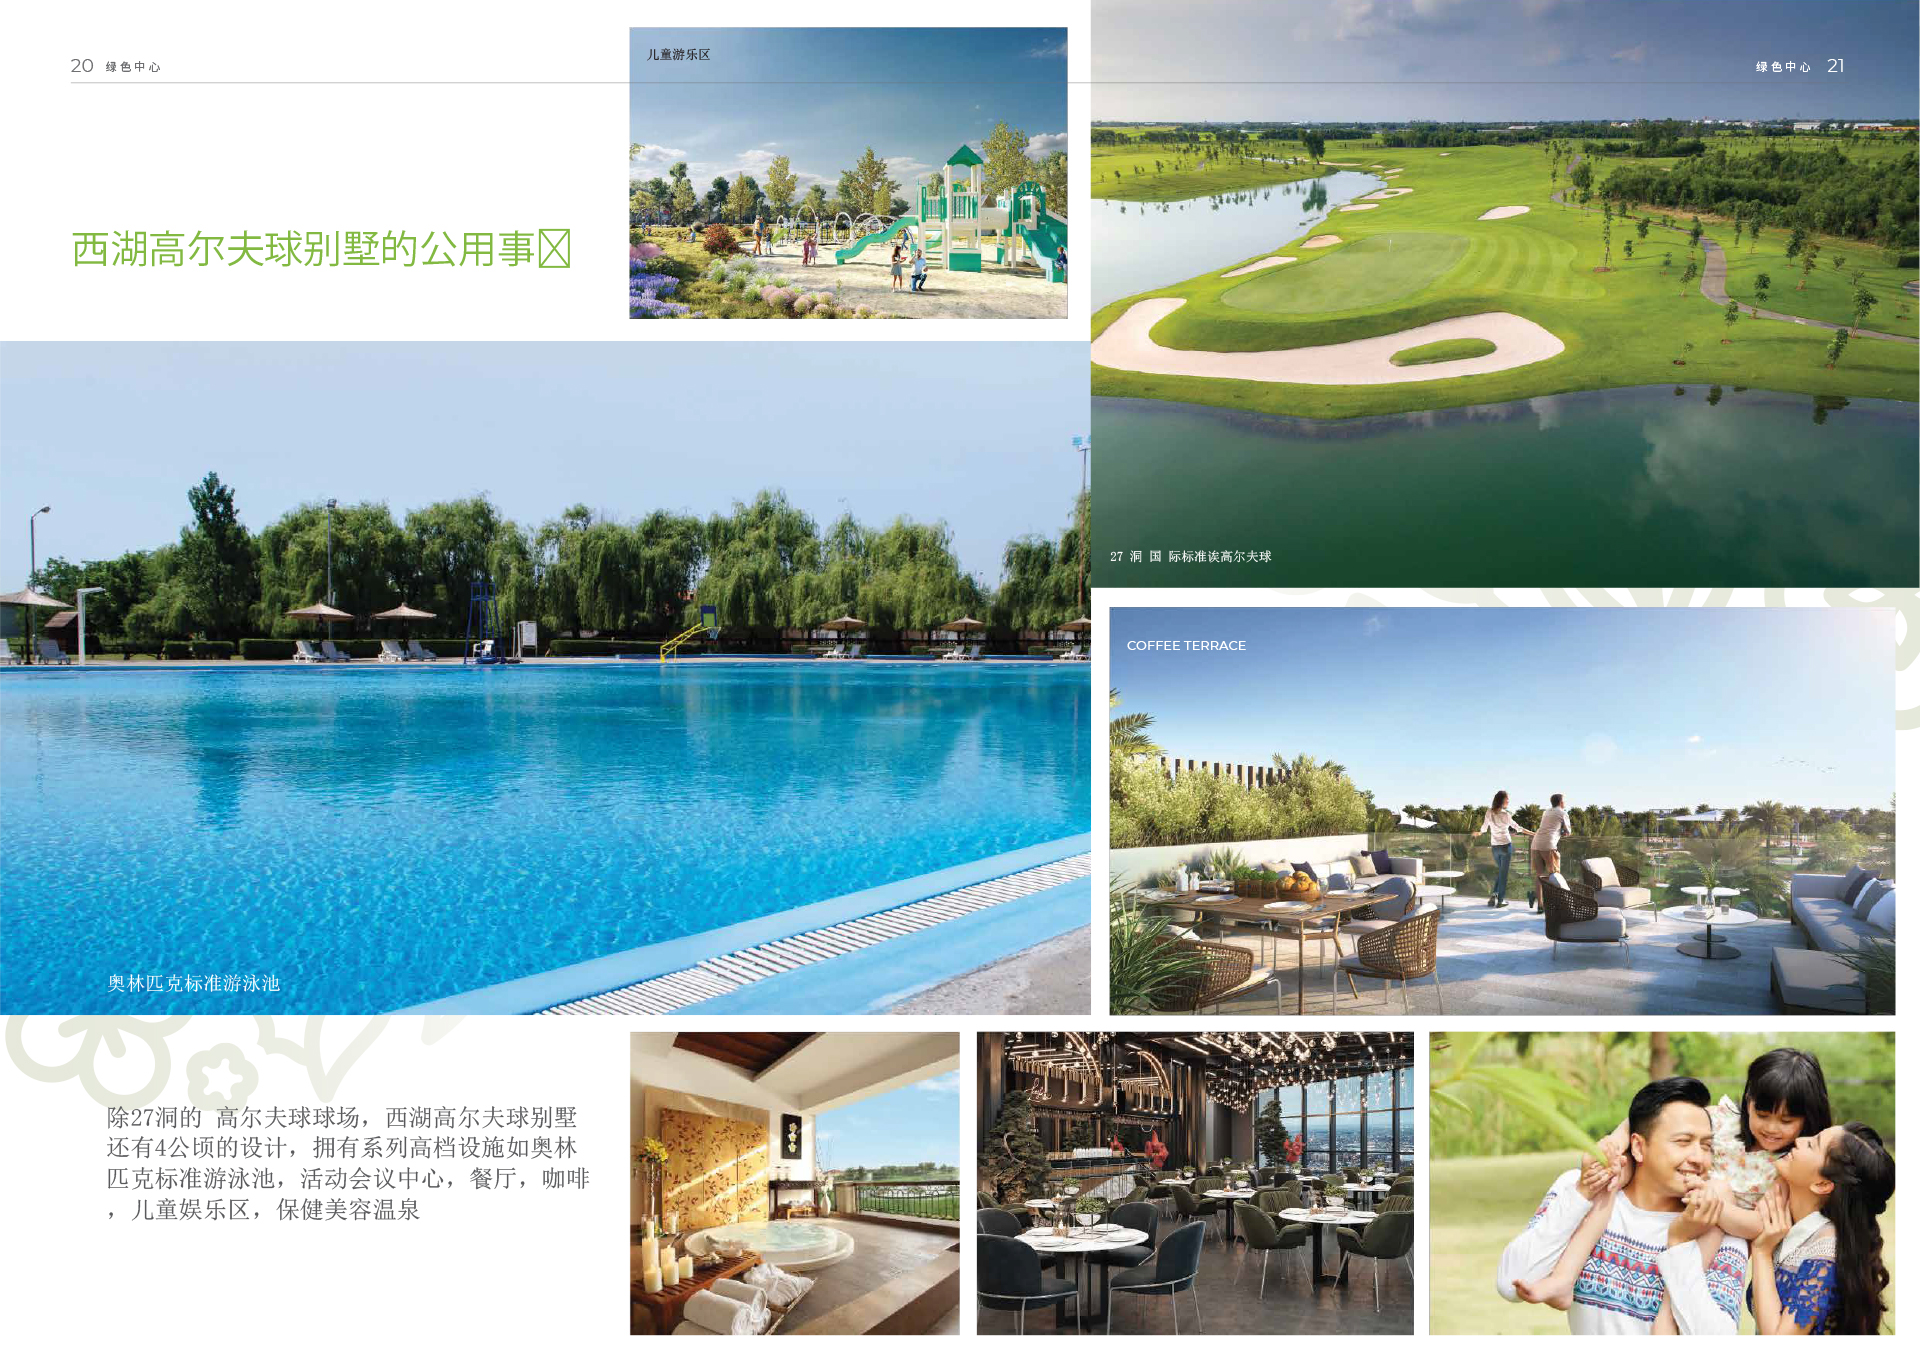 Green Center By West Lakes Golf & Villas 